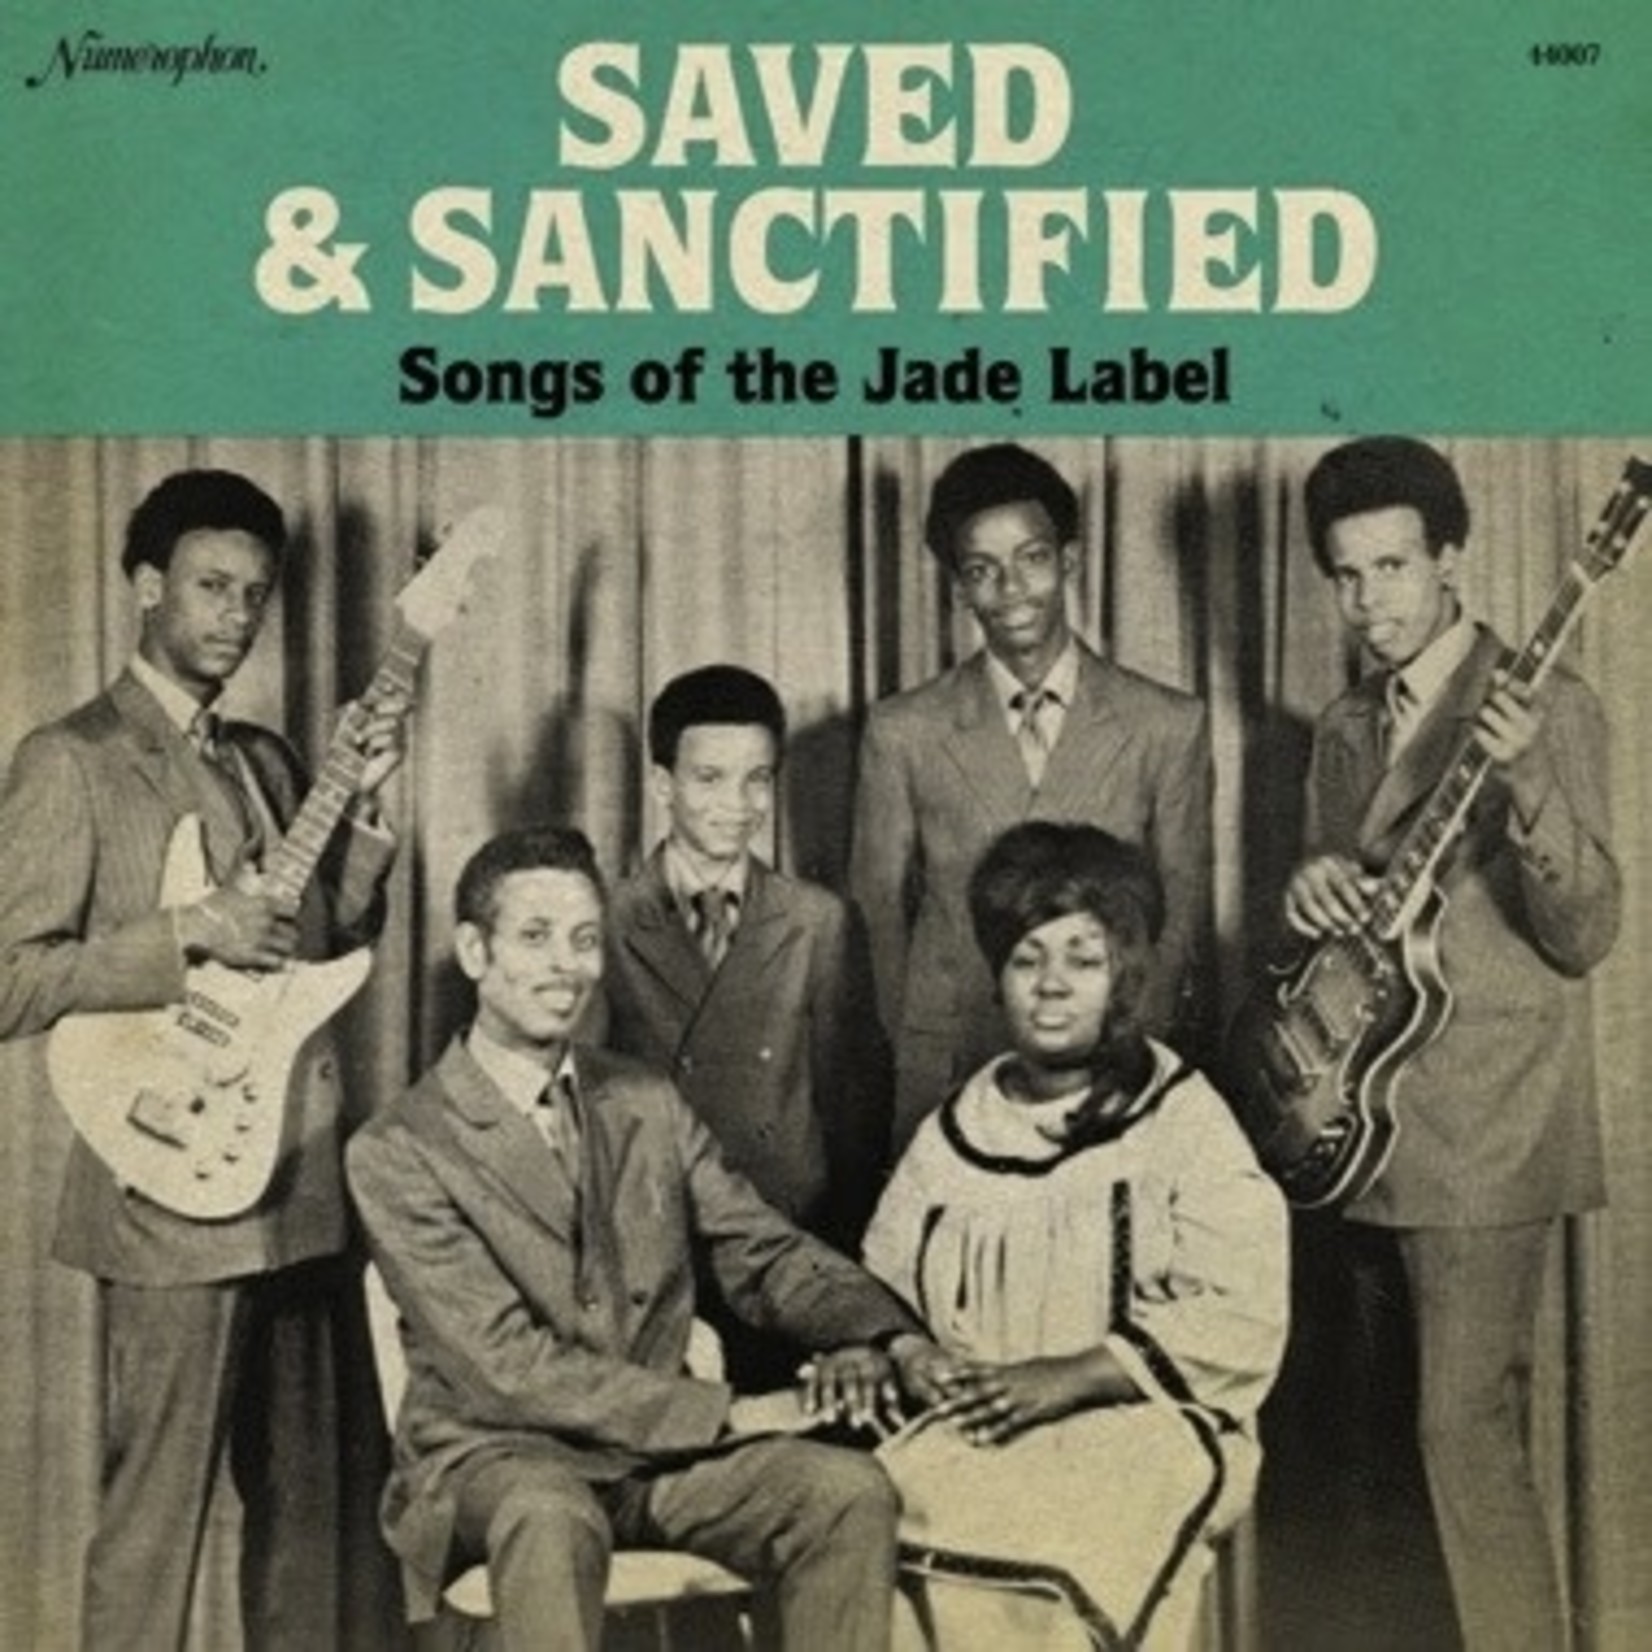 Numero Group V/A - Saved and Sanctified: Songs of the Jade Label (LP)